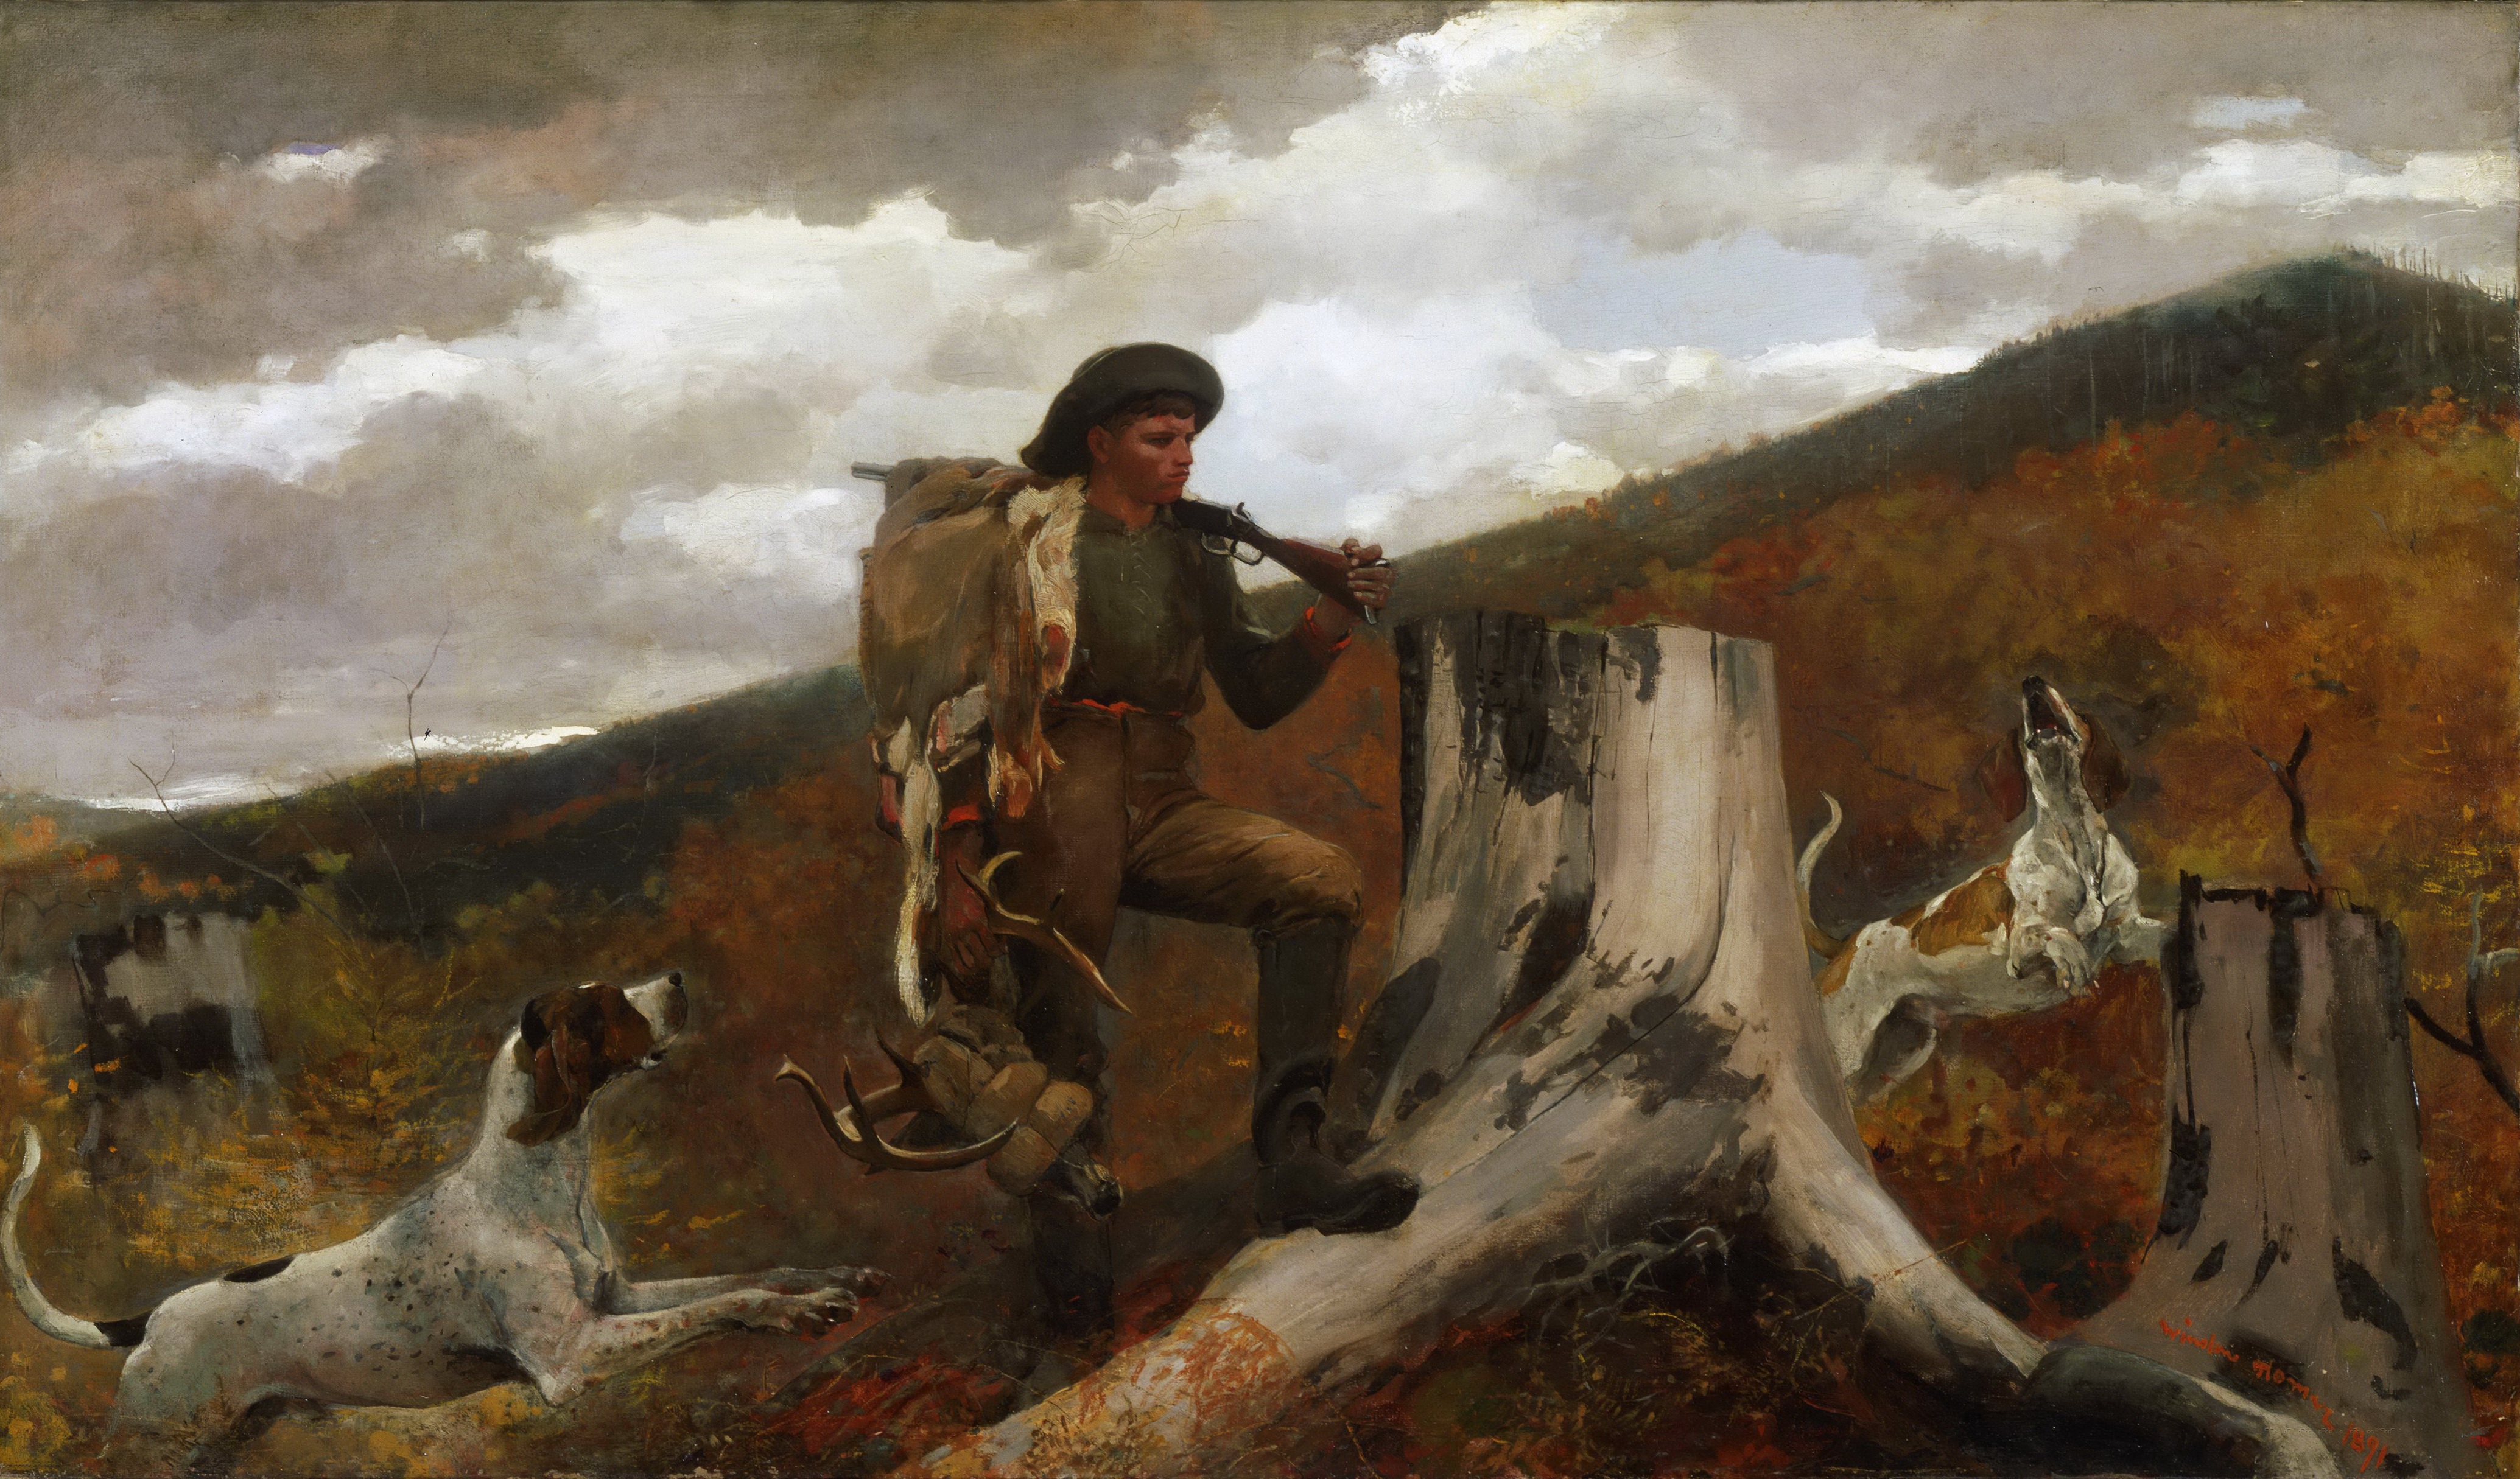 0454_Winslow Homer_A Huntsman and Dogs 썸네일